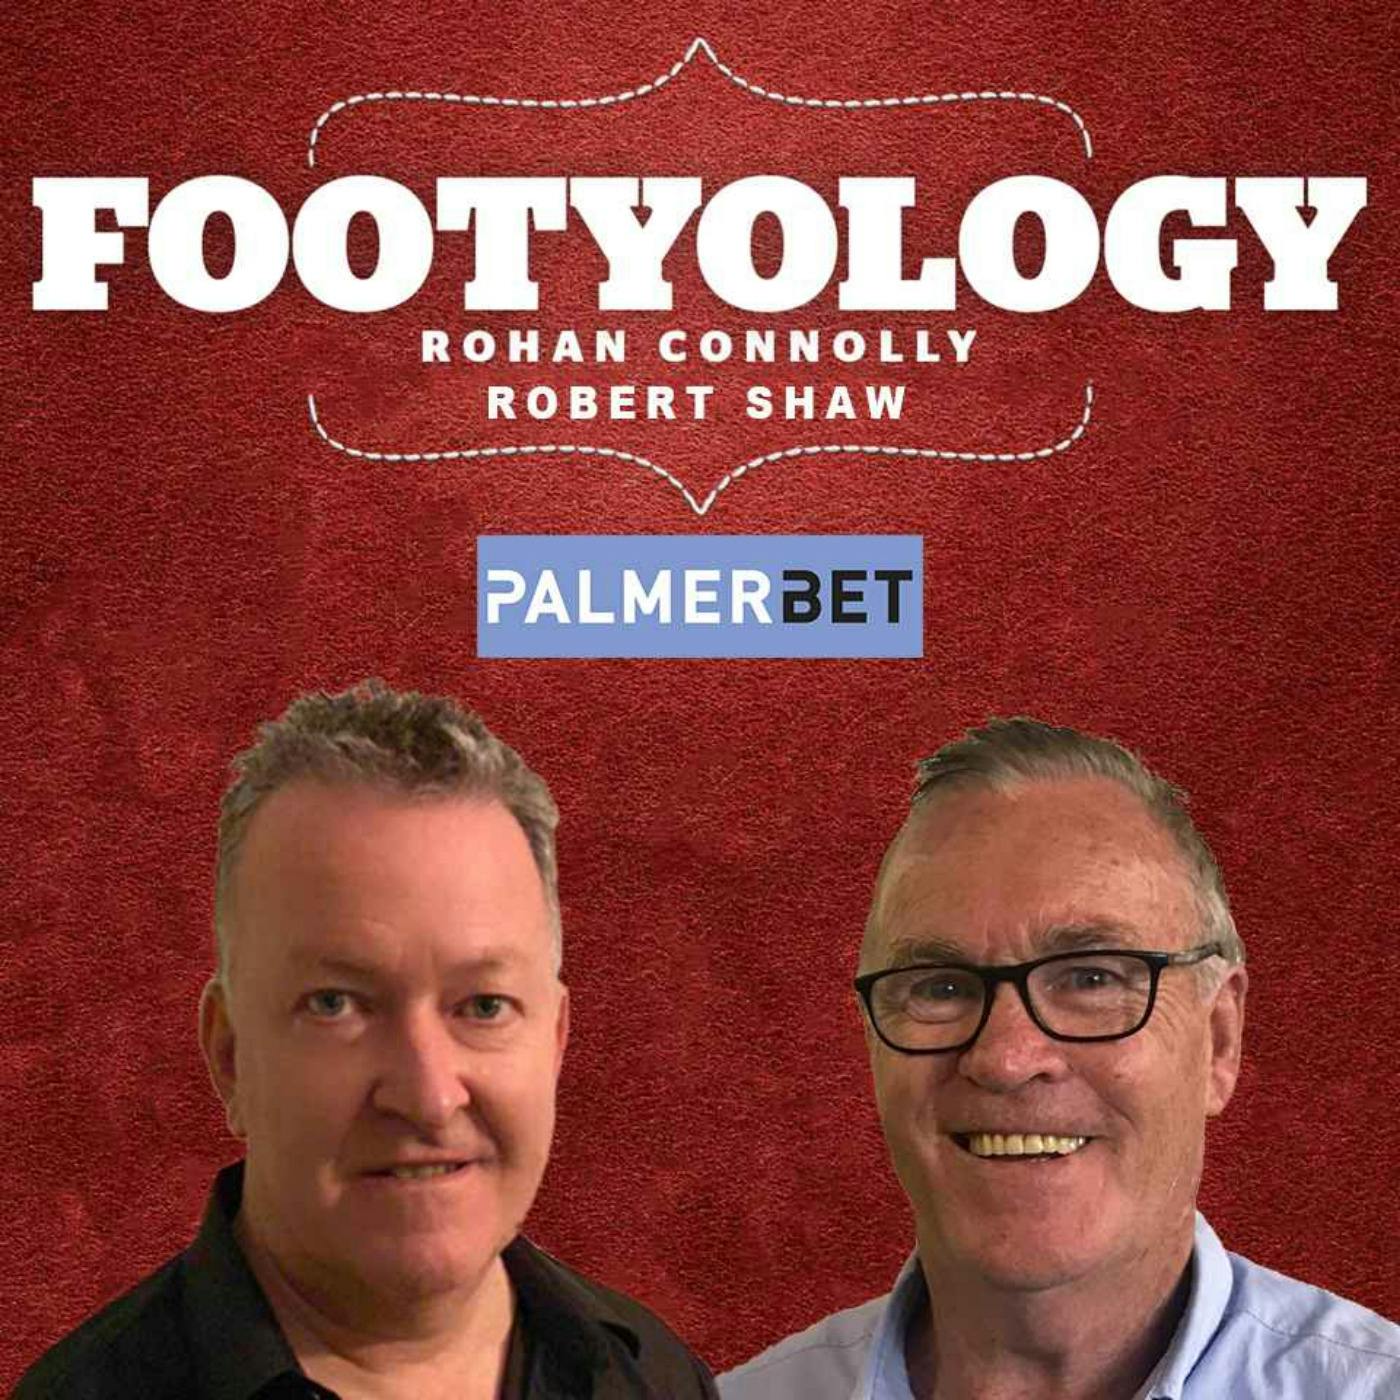 Footyology Podcast - September 11th 2022